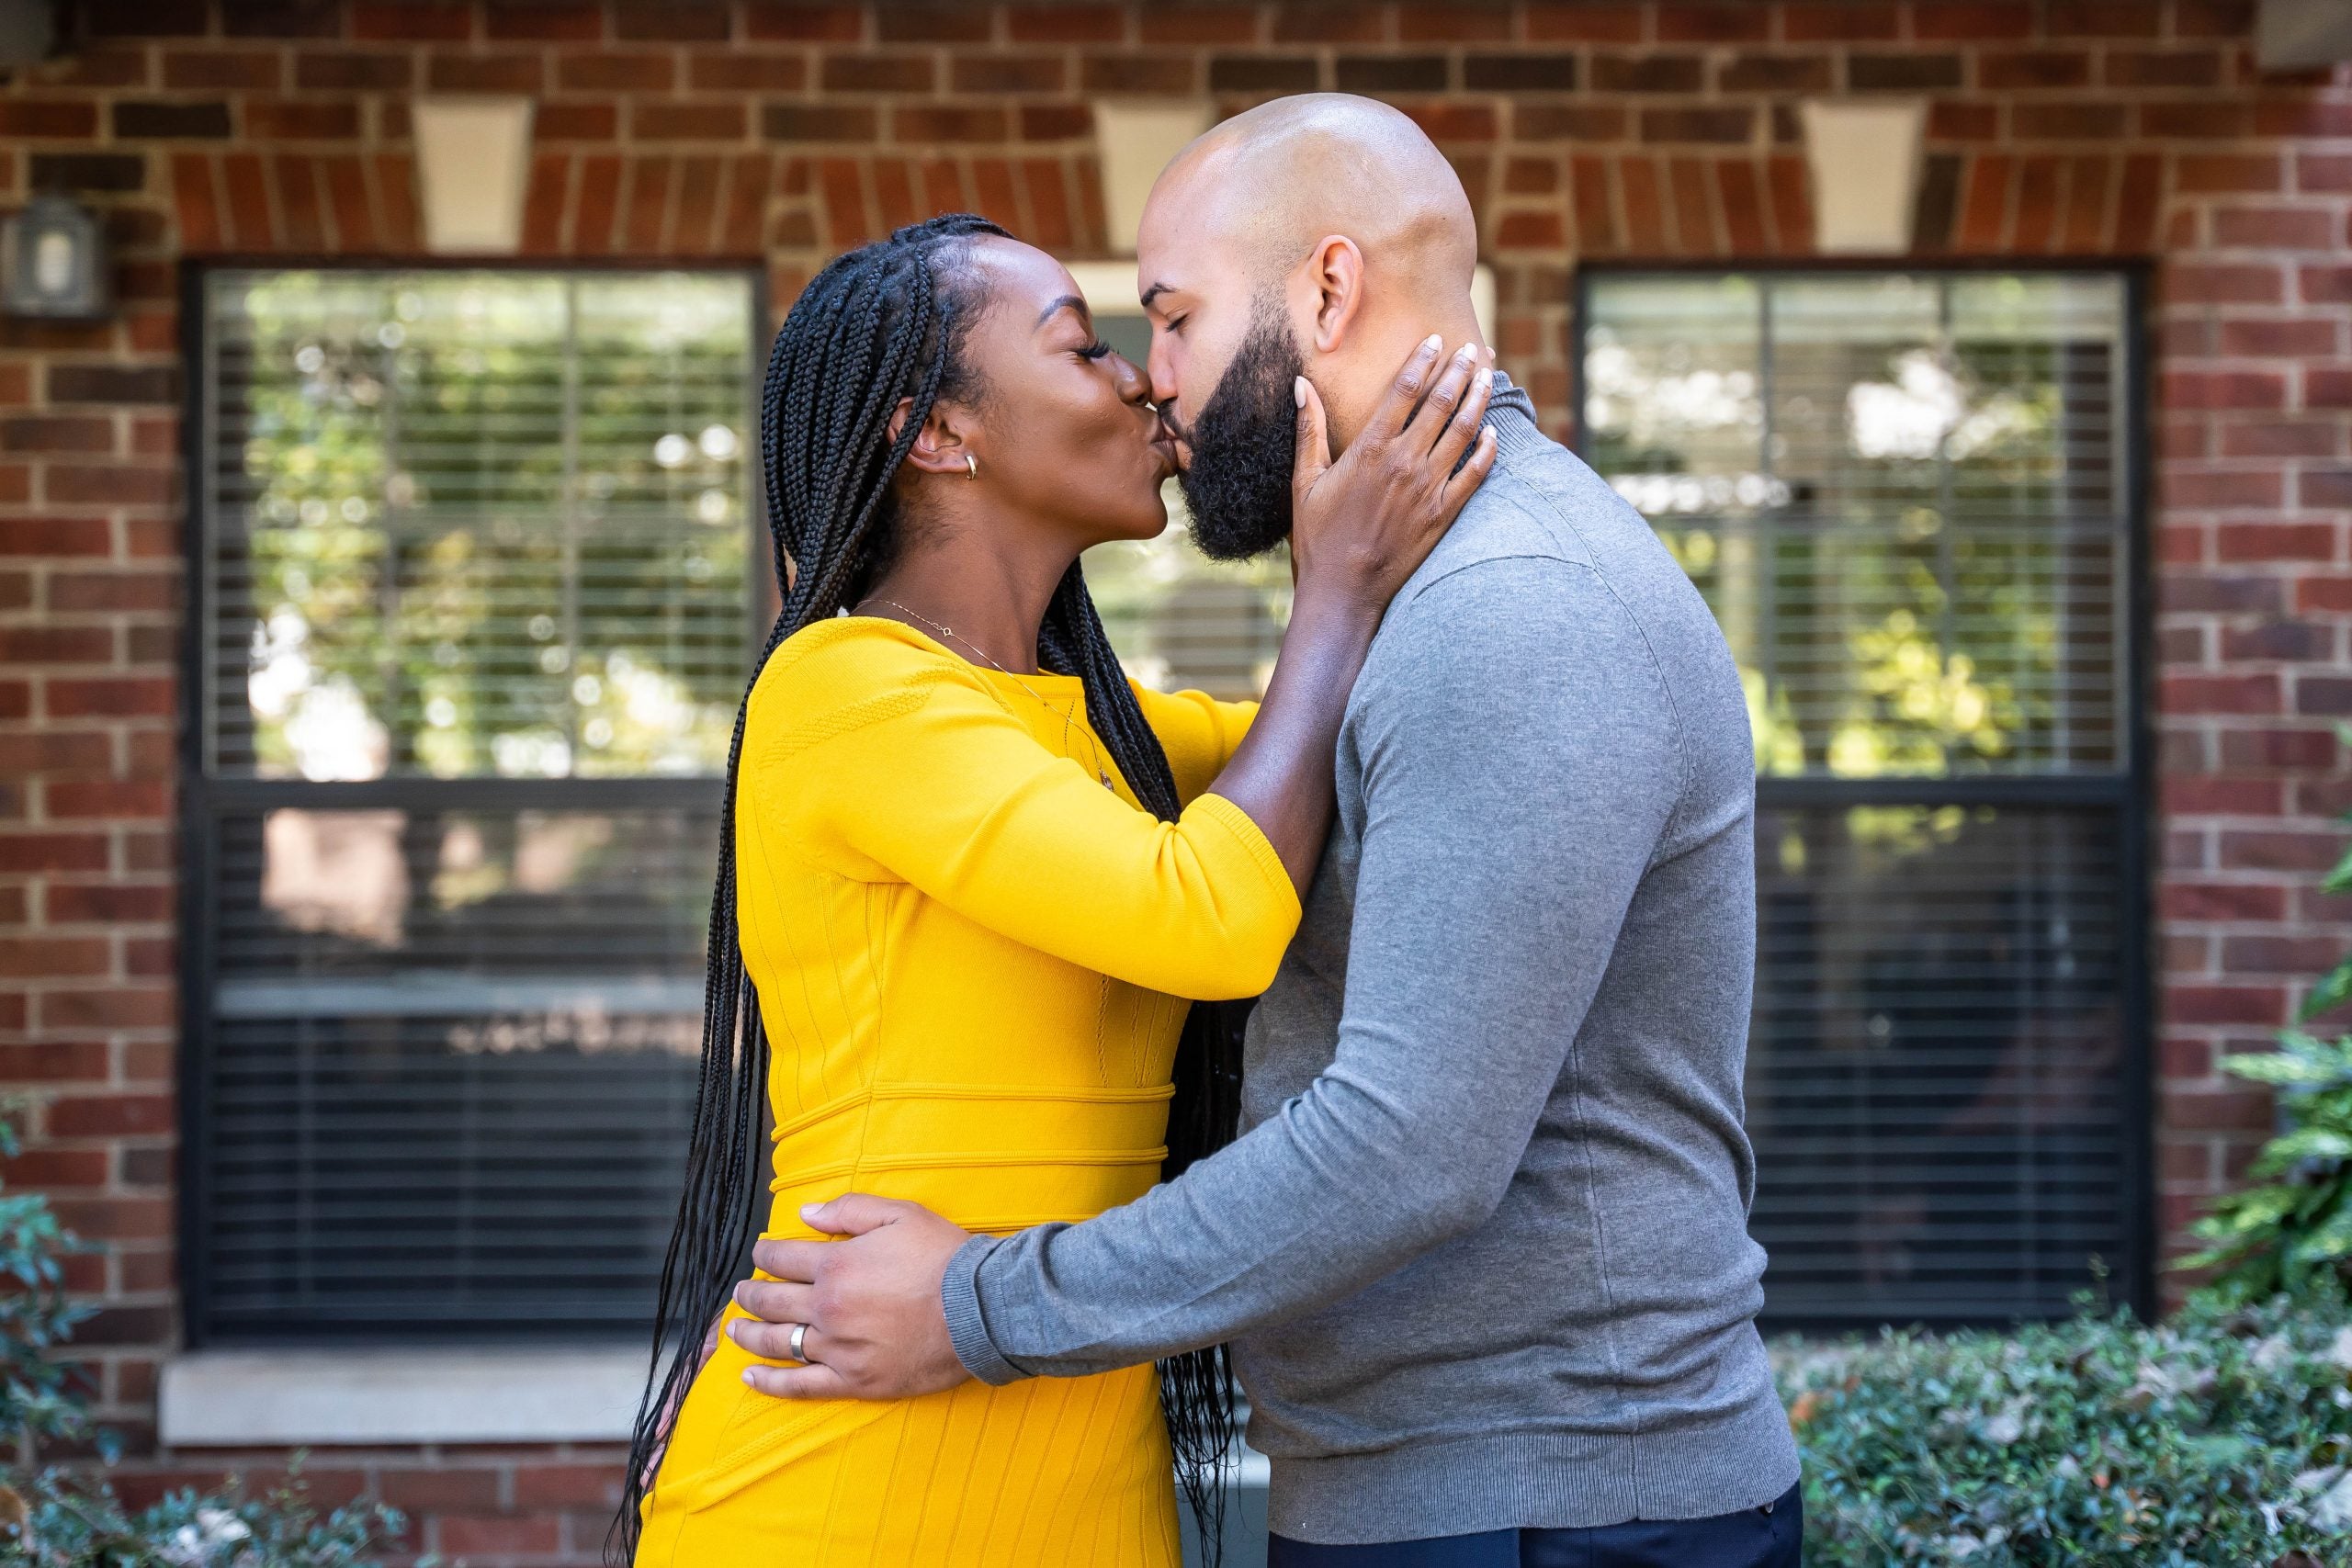 Vincent And Briana Of ‘Married At First Sight’ Explain The Perks Of Marrying A Stranger And Finding Love On TV